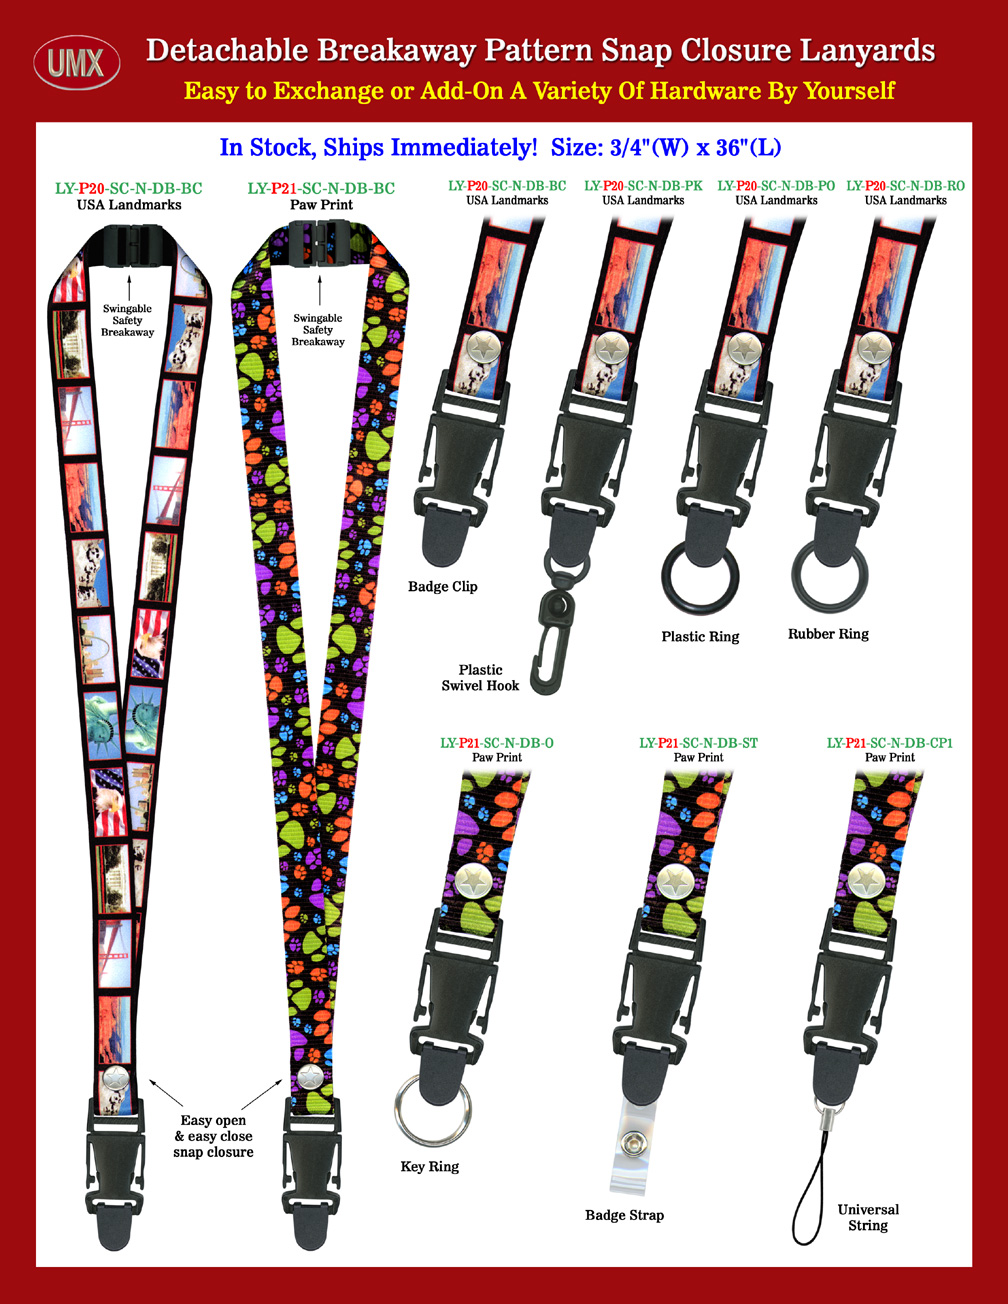 3/4" USA Landmark and Paw Print Quick Release and Safety Breakaway Snap Closure Lanyards.